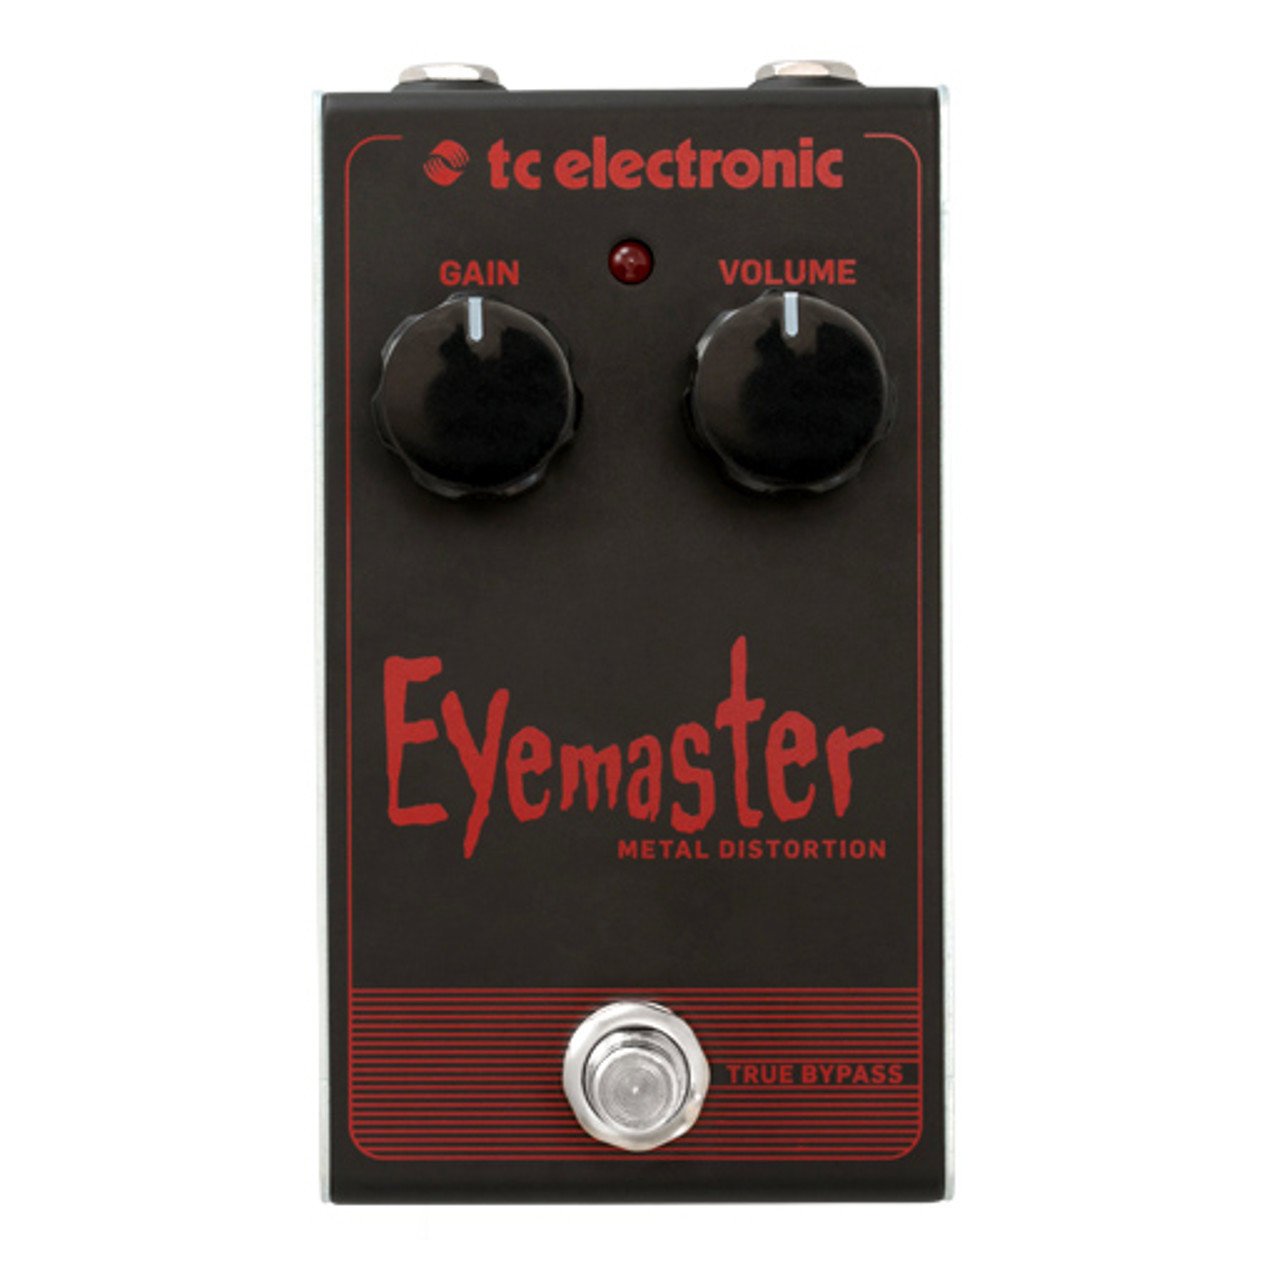 Pedals & Effects - TC Electronic Eyemaster Metal Distortion Pedal